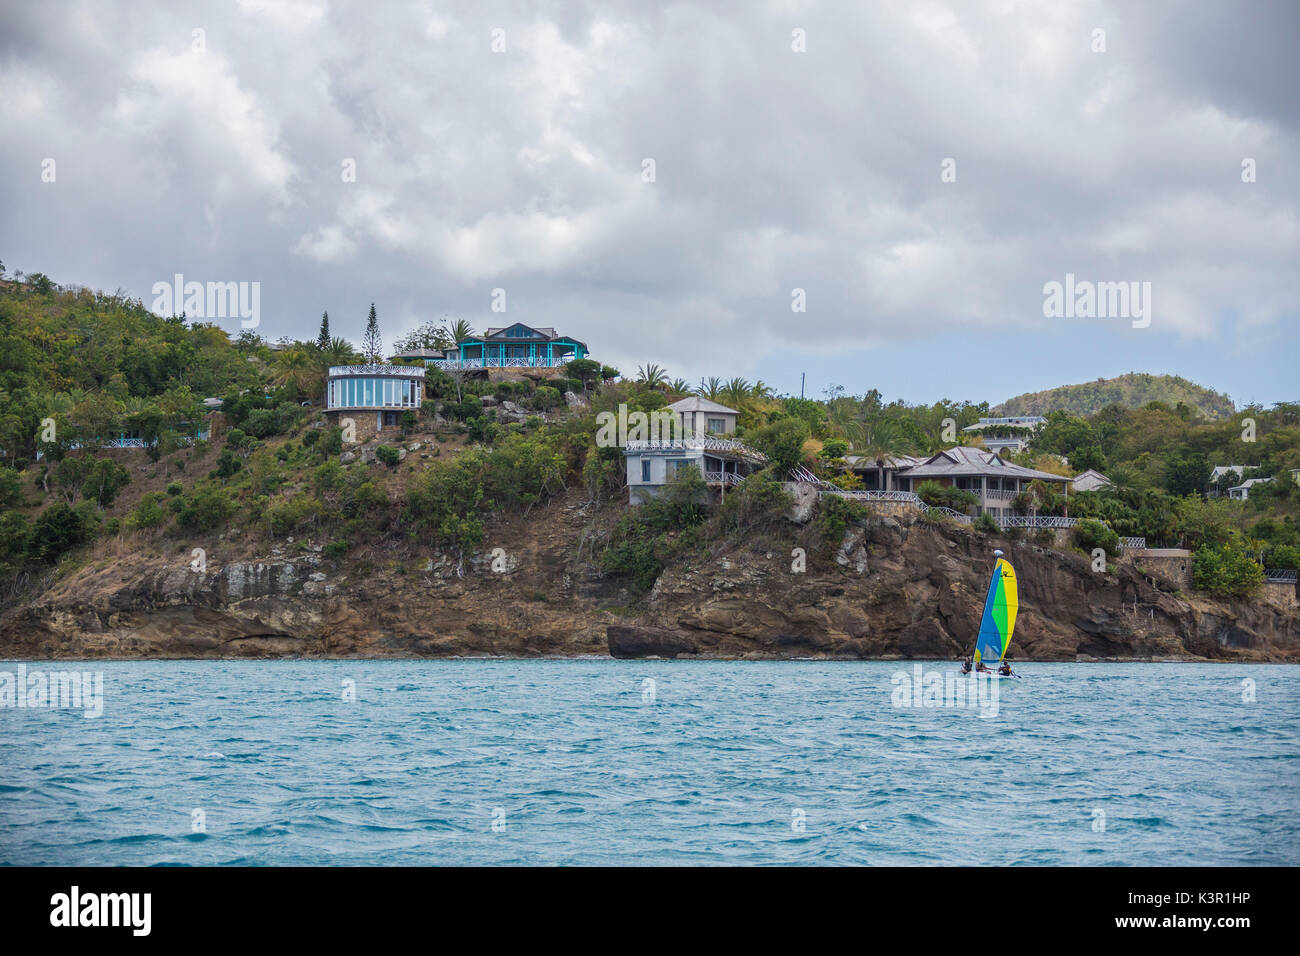 The Caribbean sea and a tourist resort seen from a boat tour in a cloudy day Antigua and Barbuda Leeward Islands West Indies Stock Photo